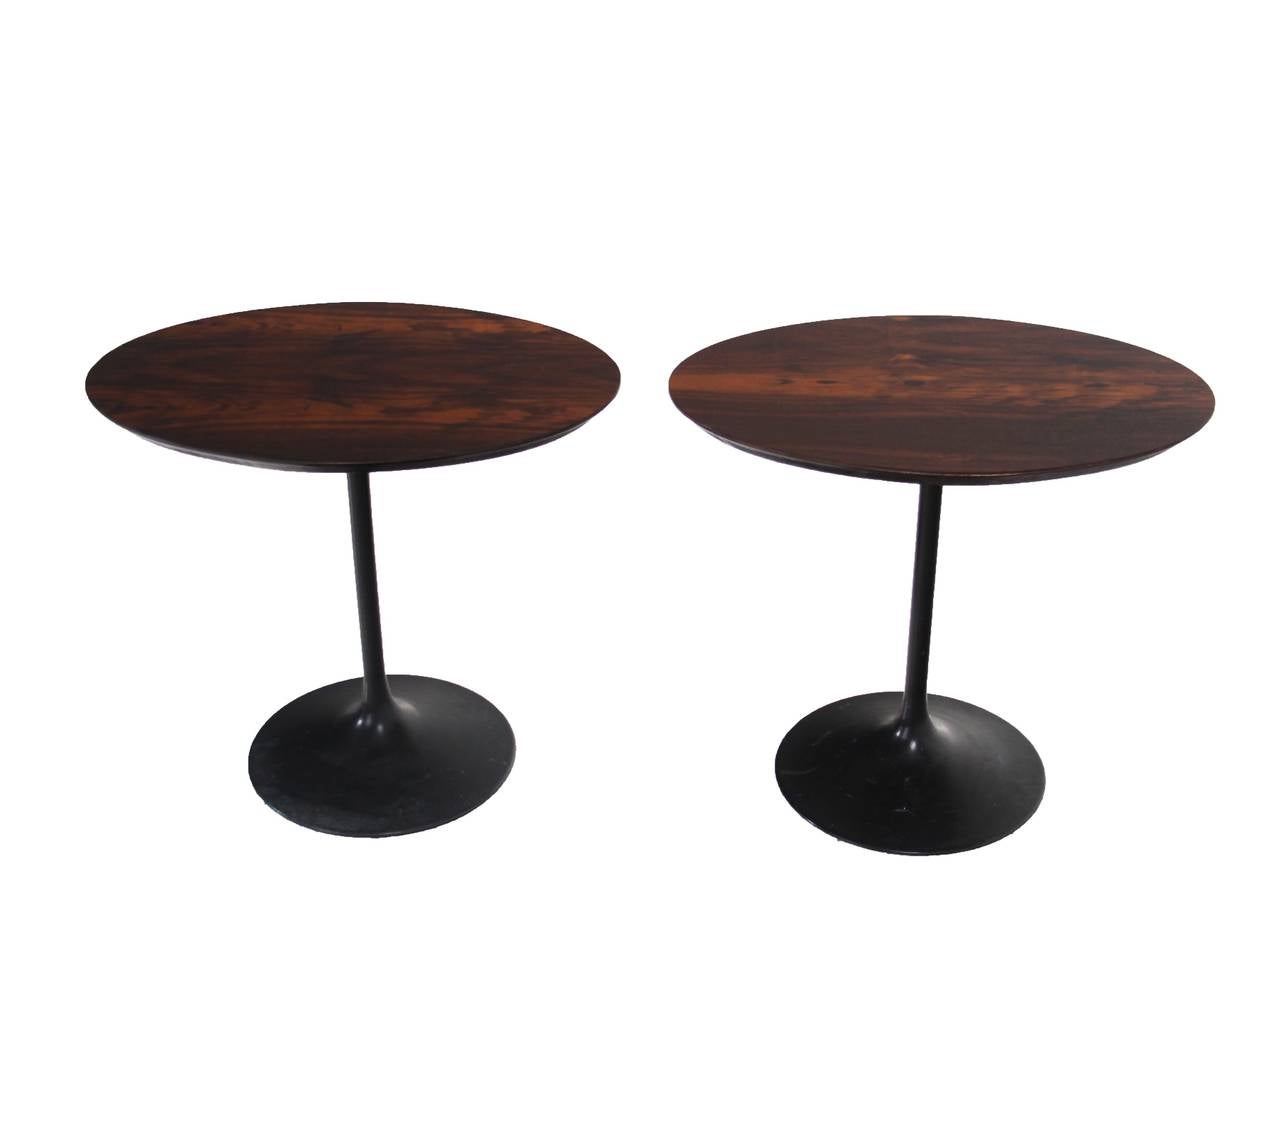 A pair of Brazilian Rosewood topped side tables with ebonized tulip bases. 

Many pieces are stored in our warehouse, so please click on CONTACT DEALER under our logo below to find out if the pieces you are interested in seeing are on the gallery